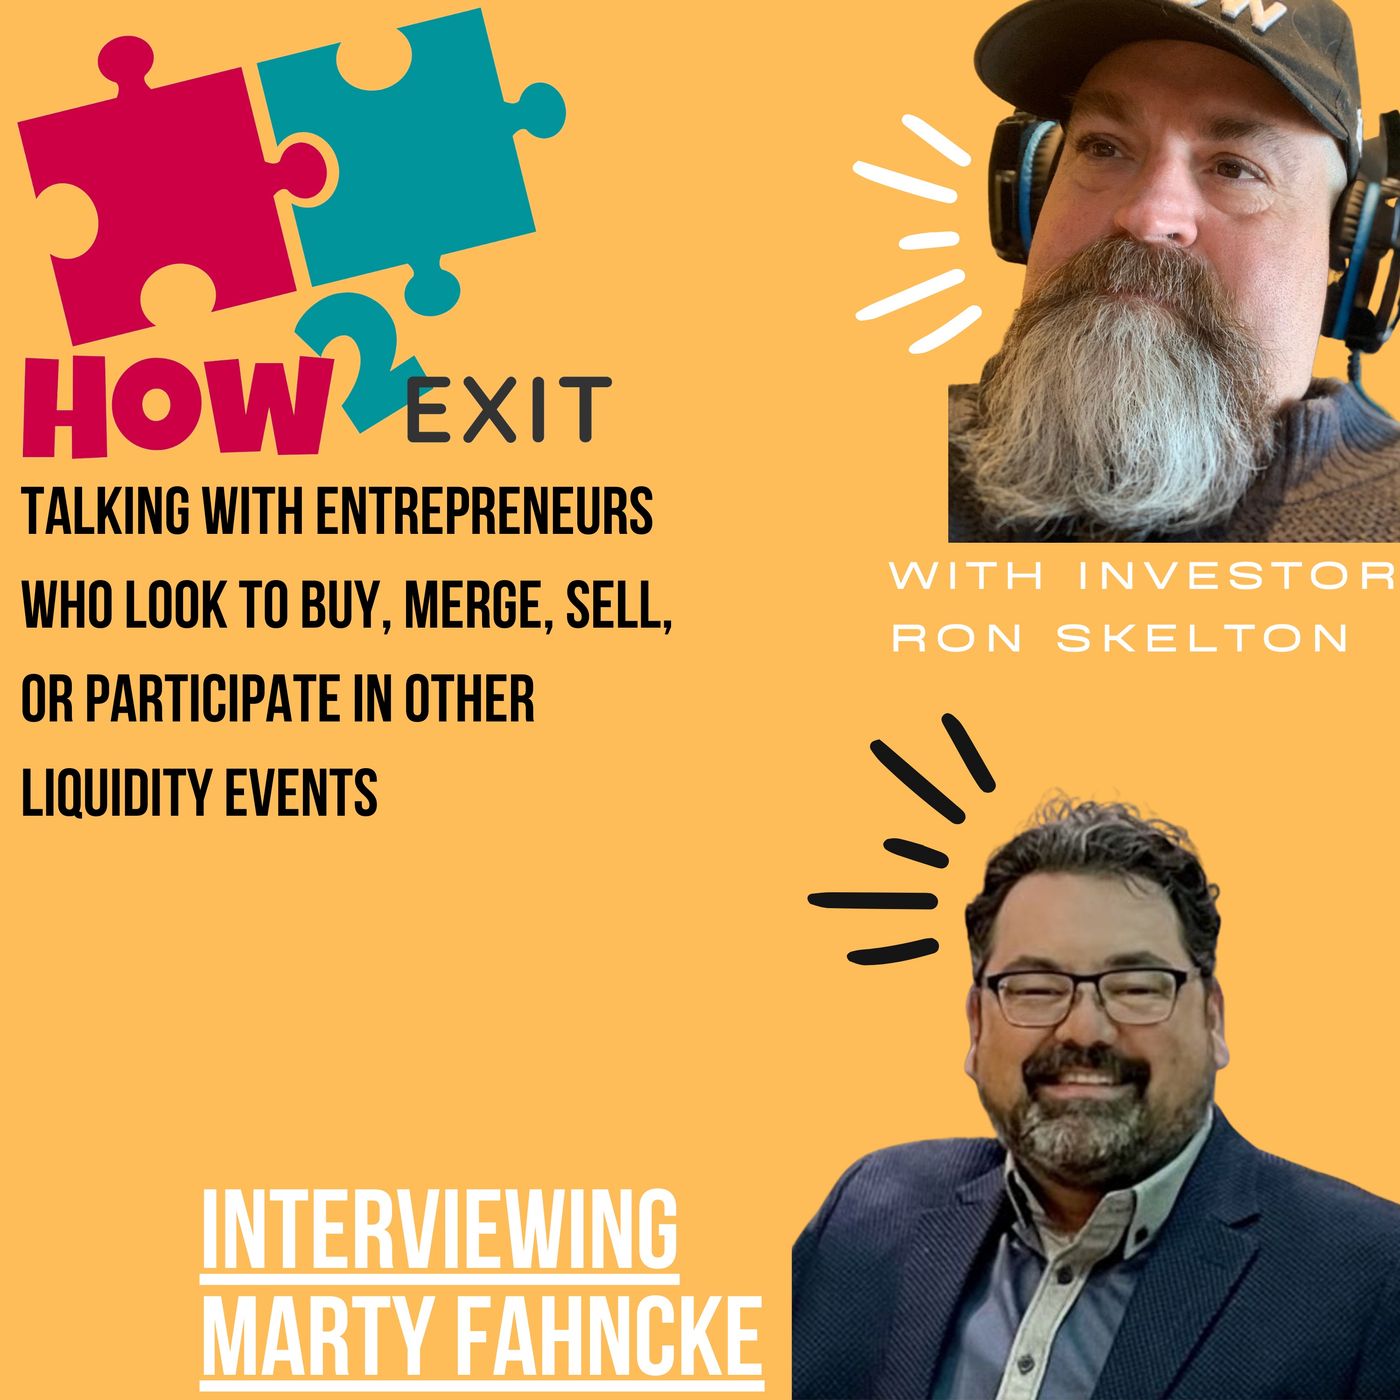 How2Exit Episode 20: Marty Fahncke - executed over $400 million in Mergers and Acquisitions. Image